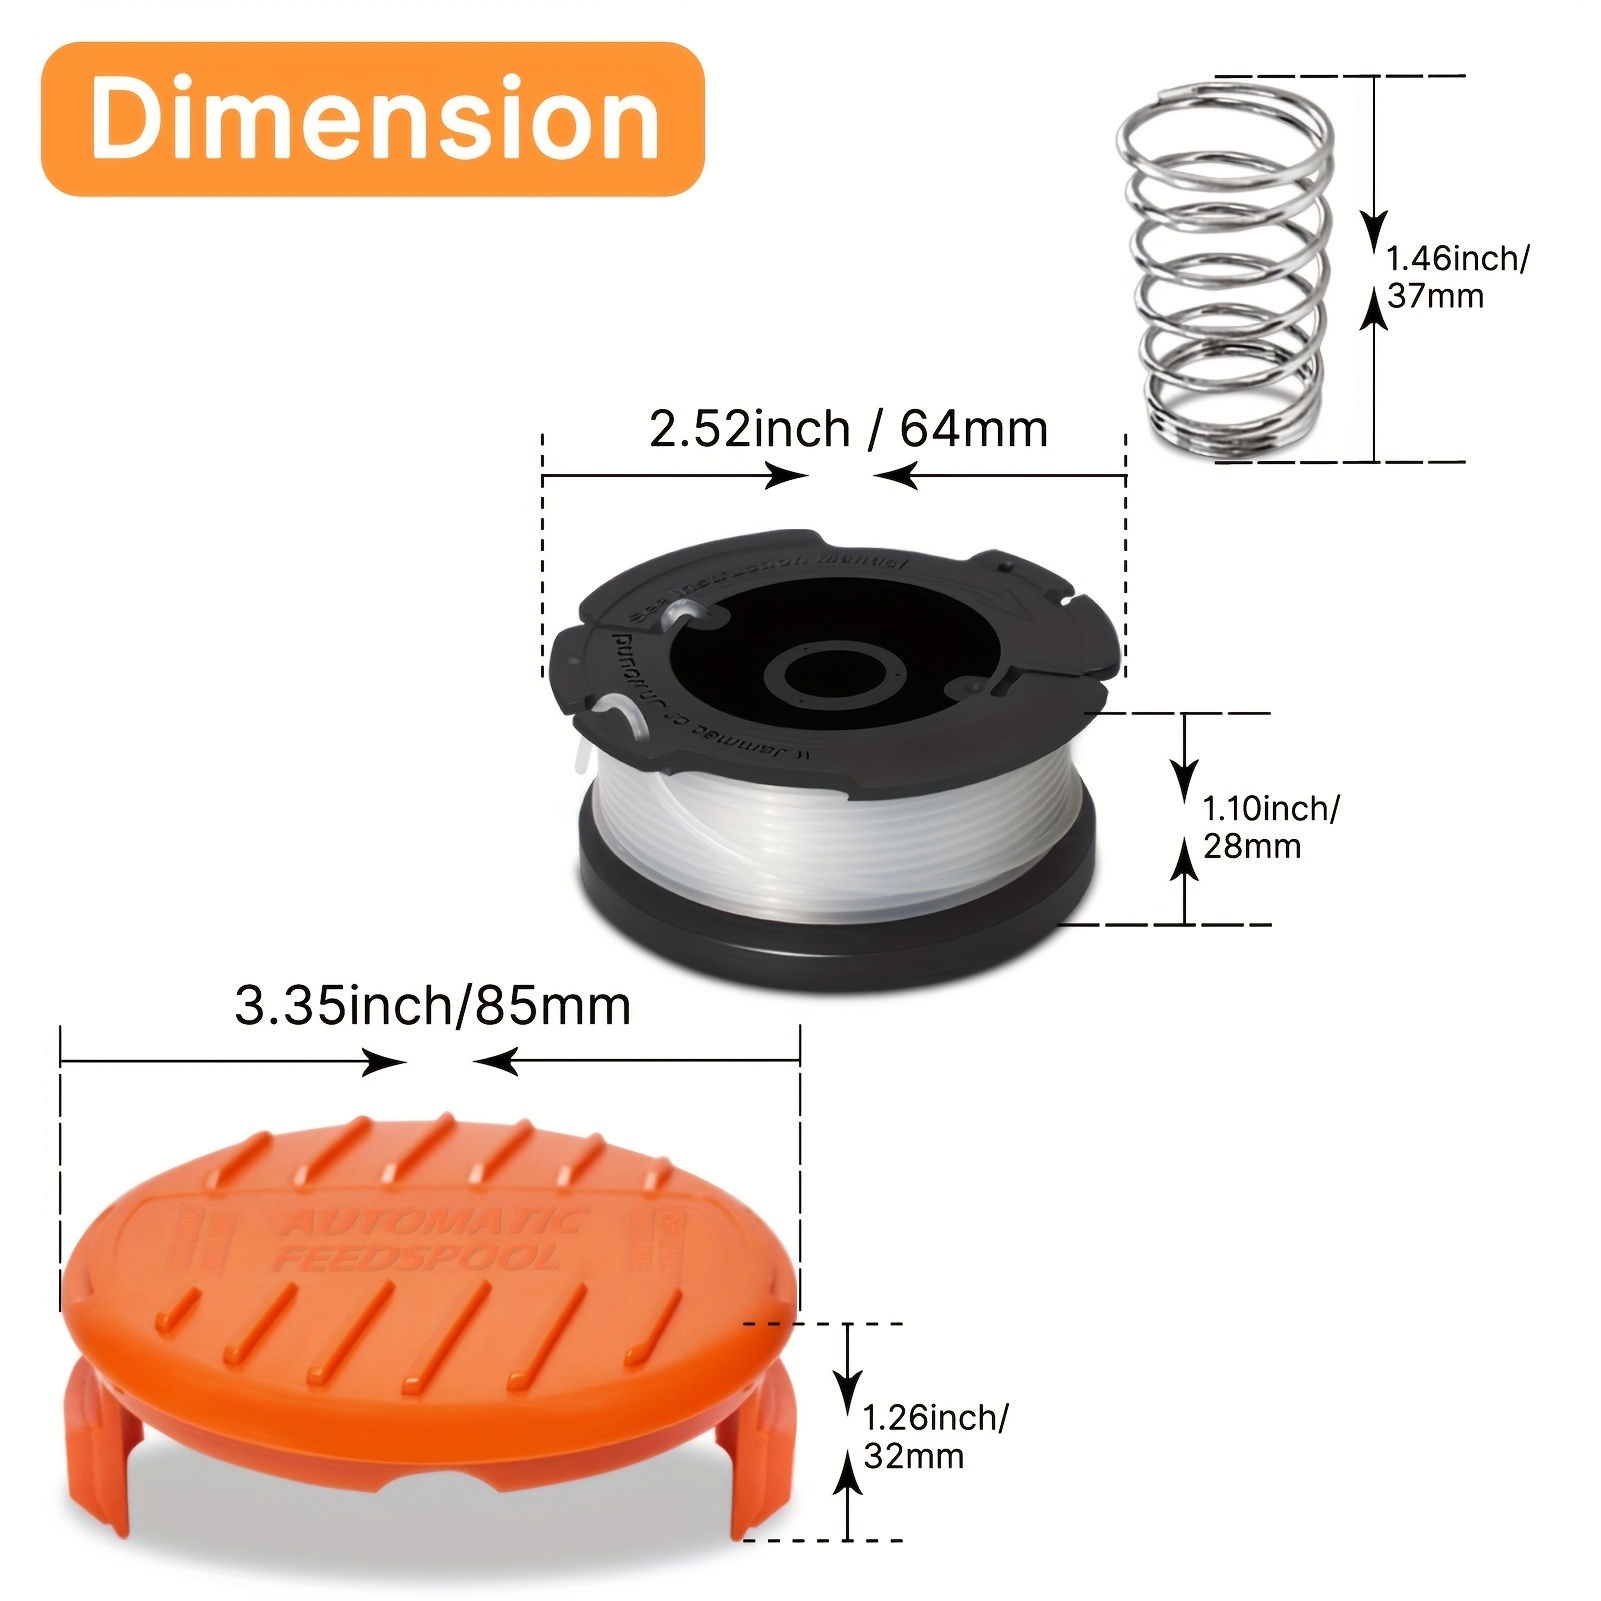 String Trimmer Spools Compatible with Black and Decker AF-100 Autofeed Weed  Eater Spools, Replacement Spool Weed Eater Spools Refills Line GH600 GH900